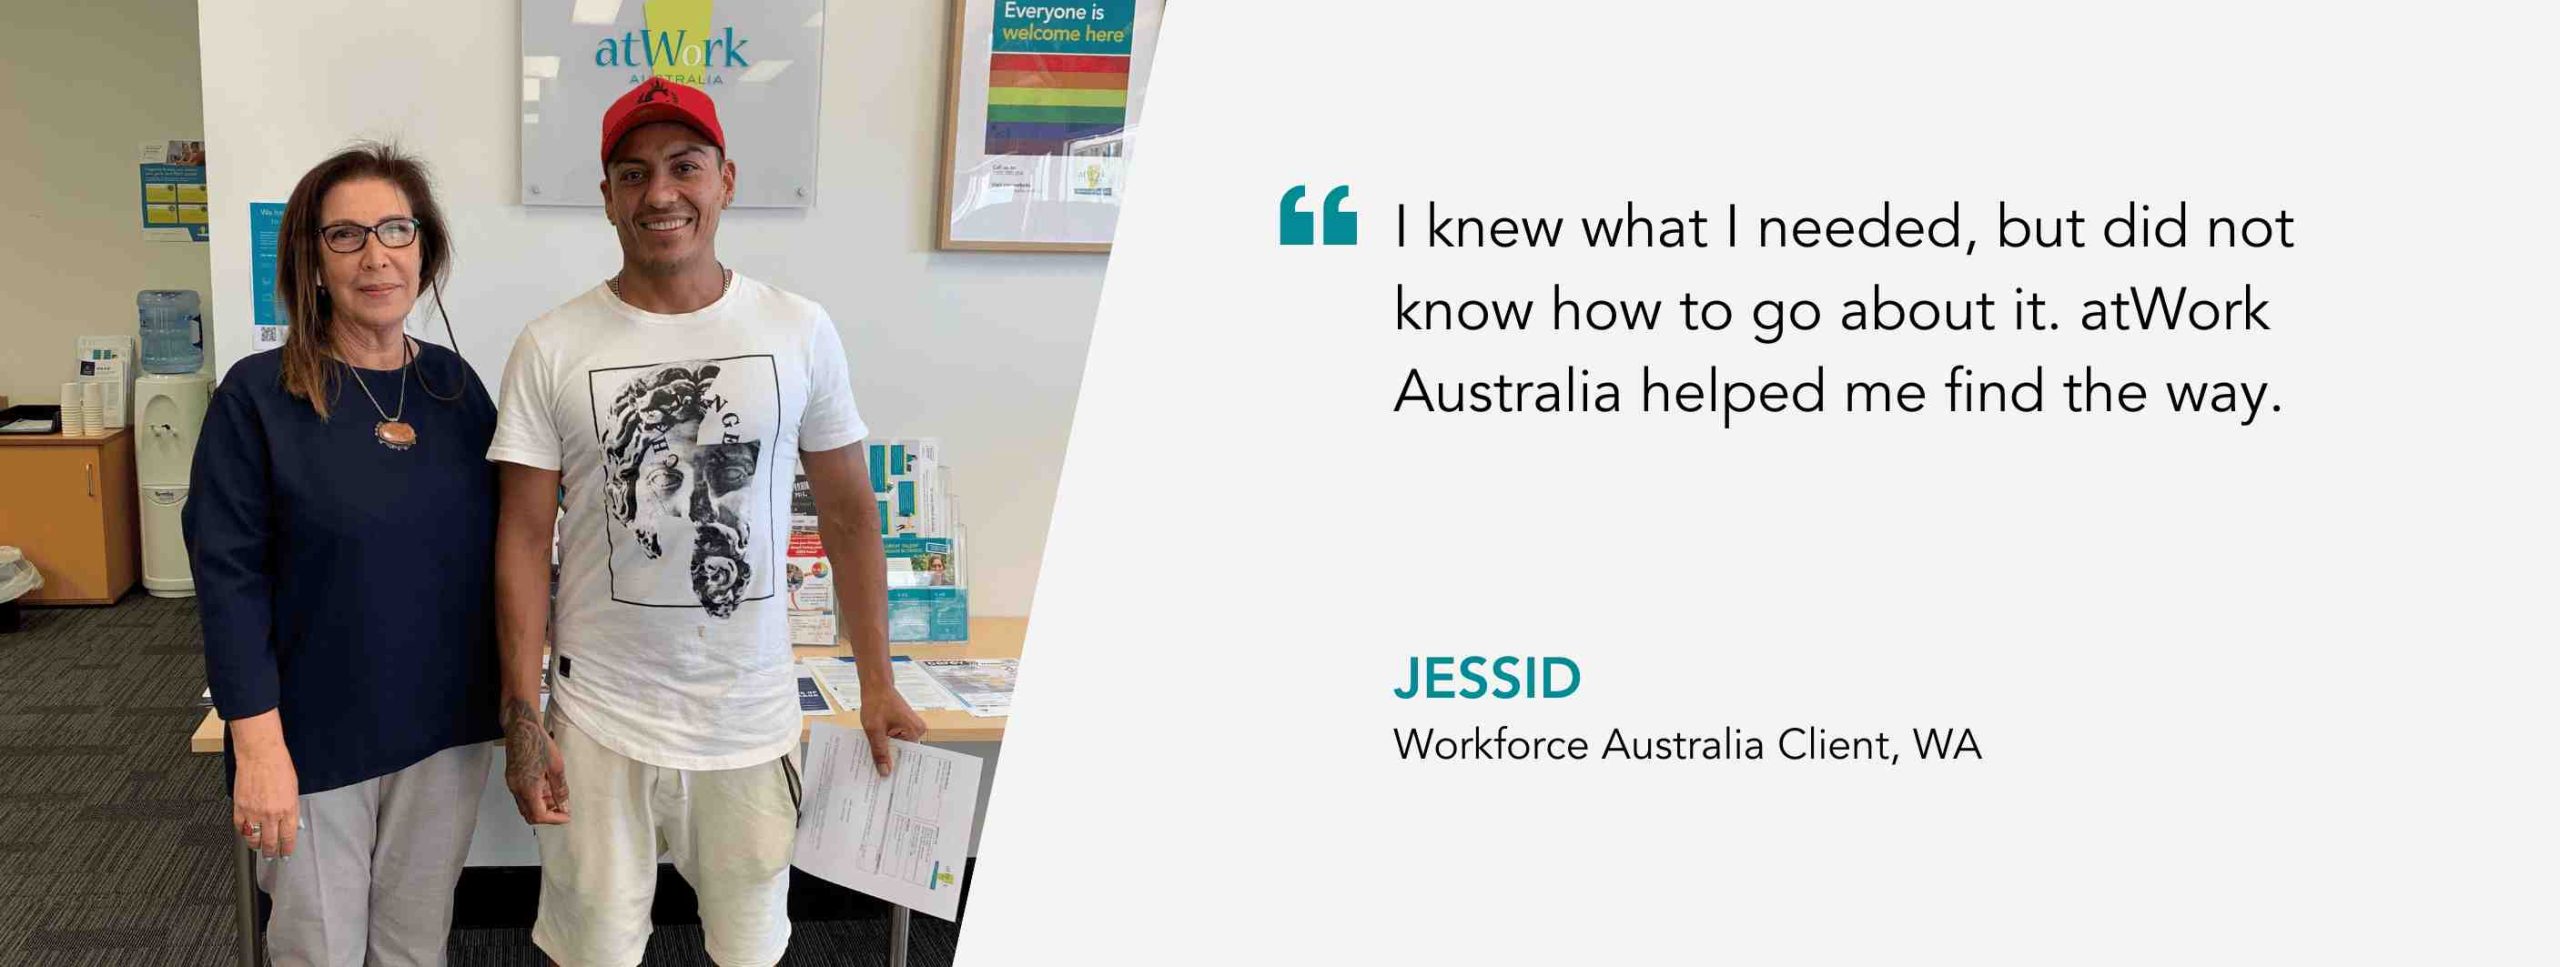 I knew what I needed, but did not know how to go about it. atWork Australia helped me find the way. Jessid, Workforce Australia Client, WA